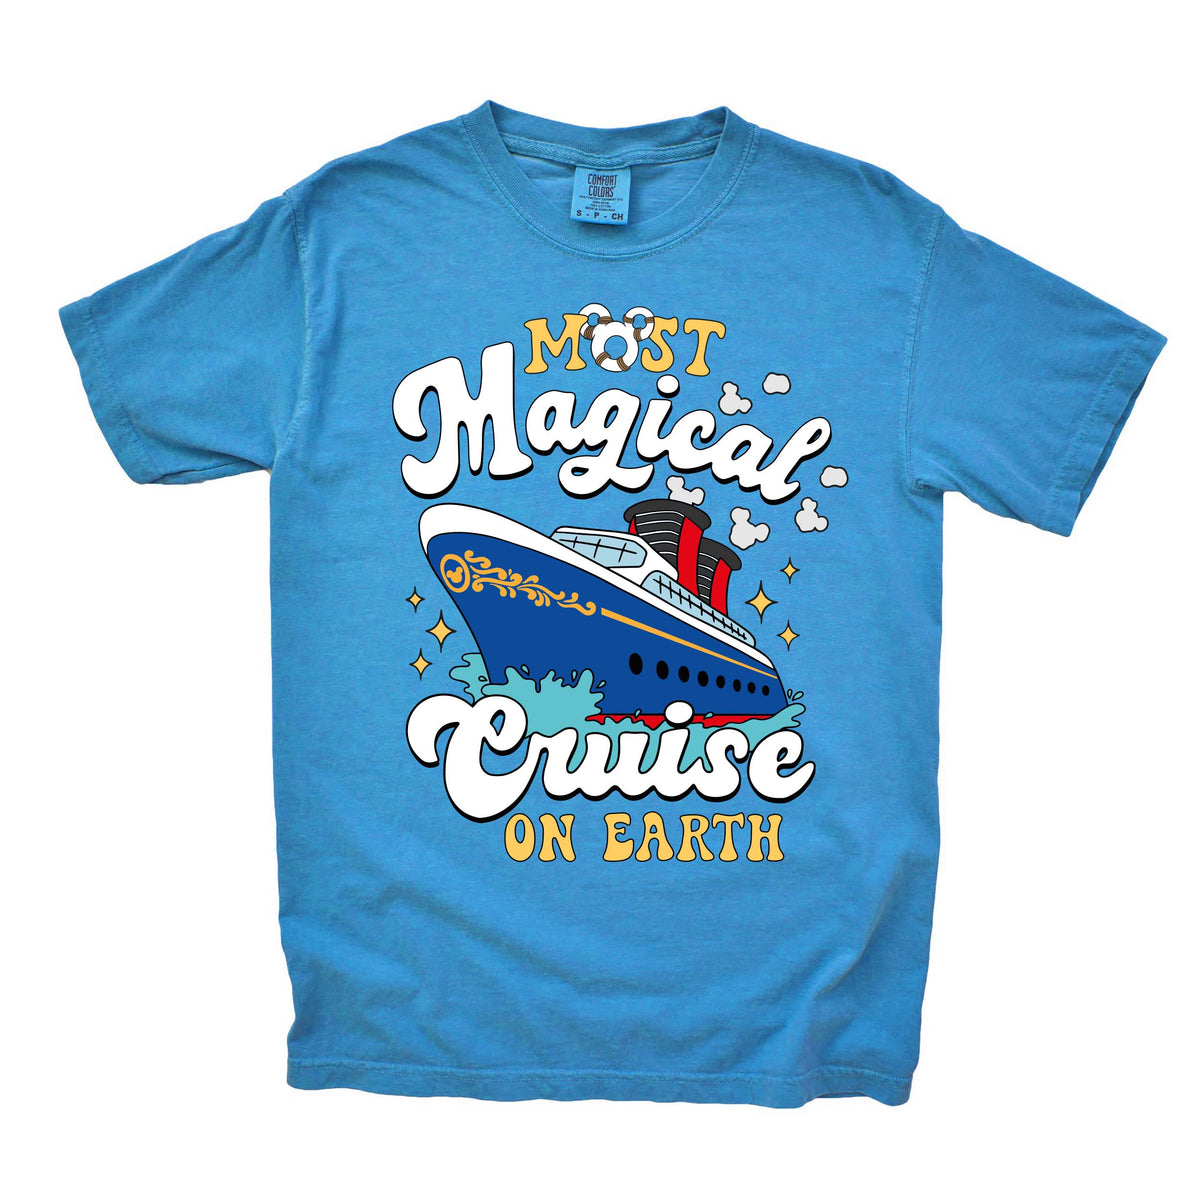 Most Magical Cruise on Earth Tee